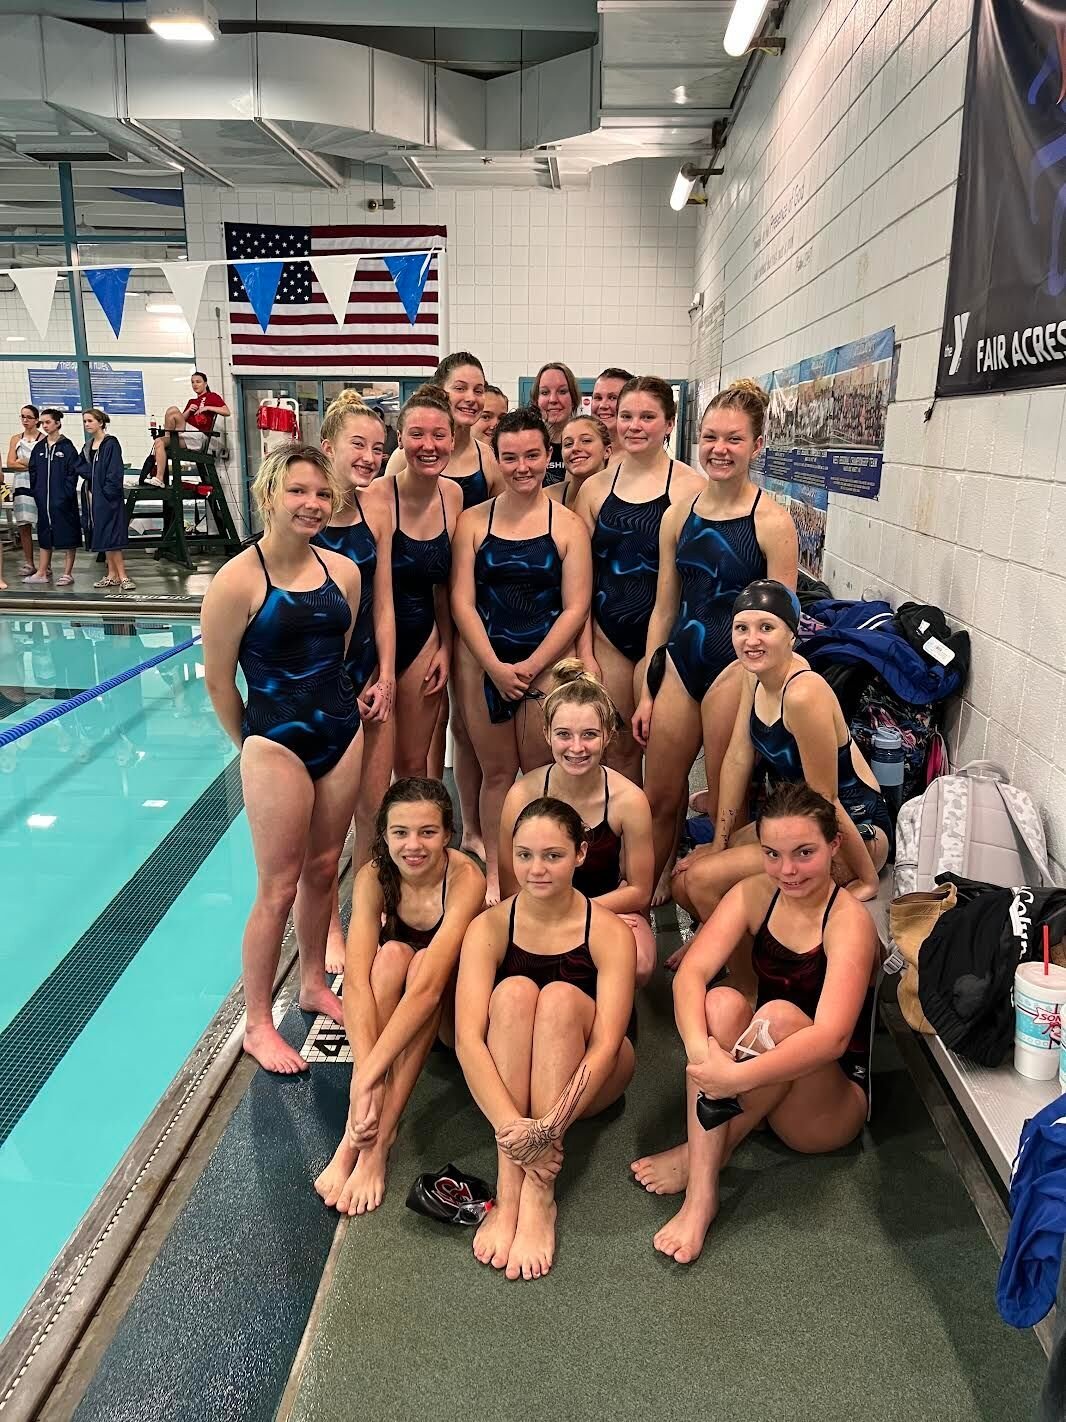 The Marshfield and Seymour swimmers are all smiles before the All Relays meet.